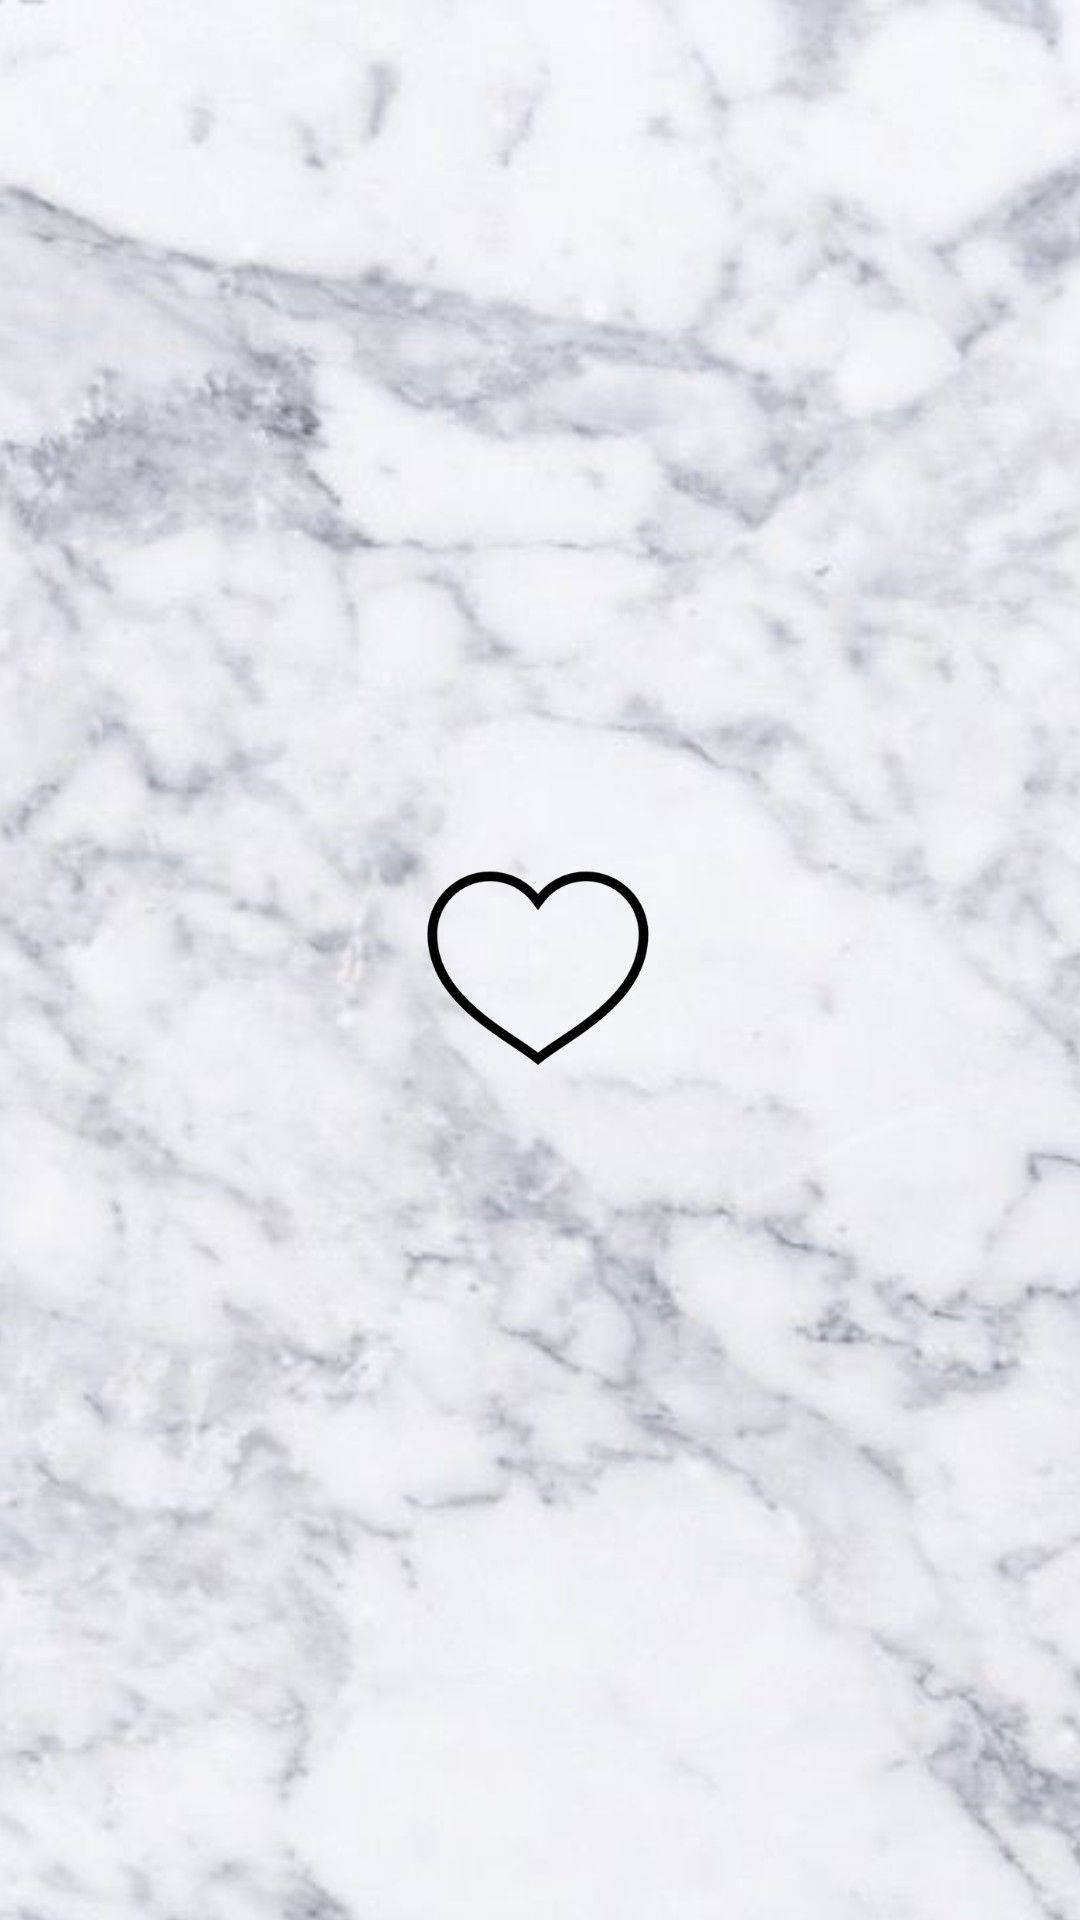 Stylish Hollow Heart Shape On Black And White Marble Iphone Background